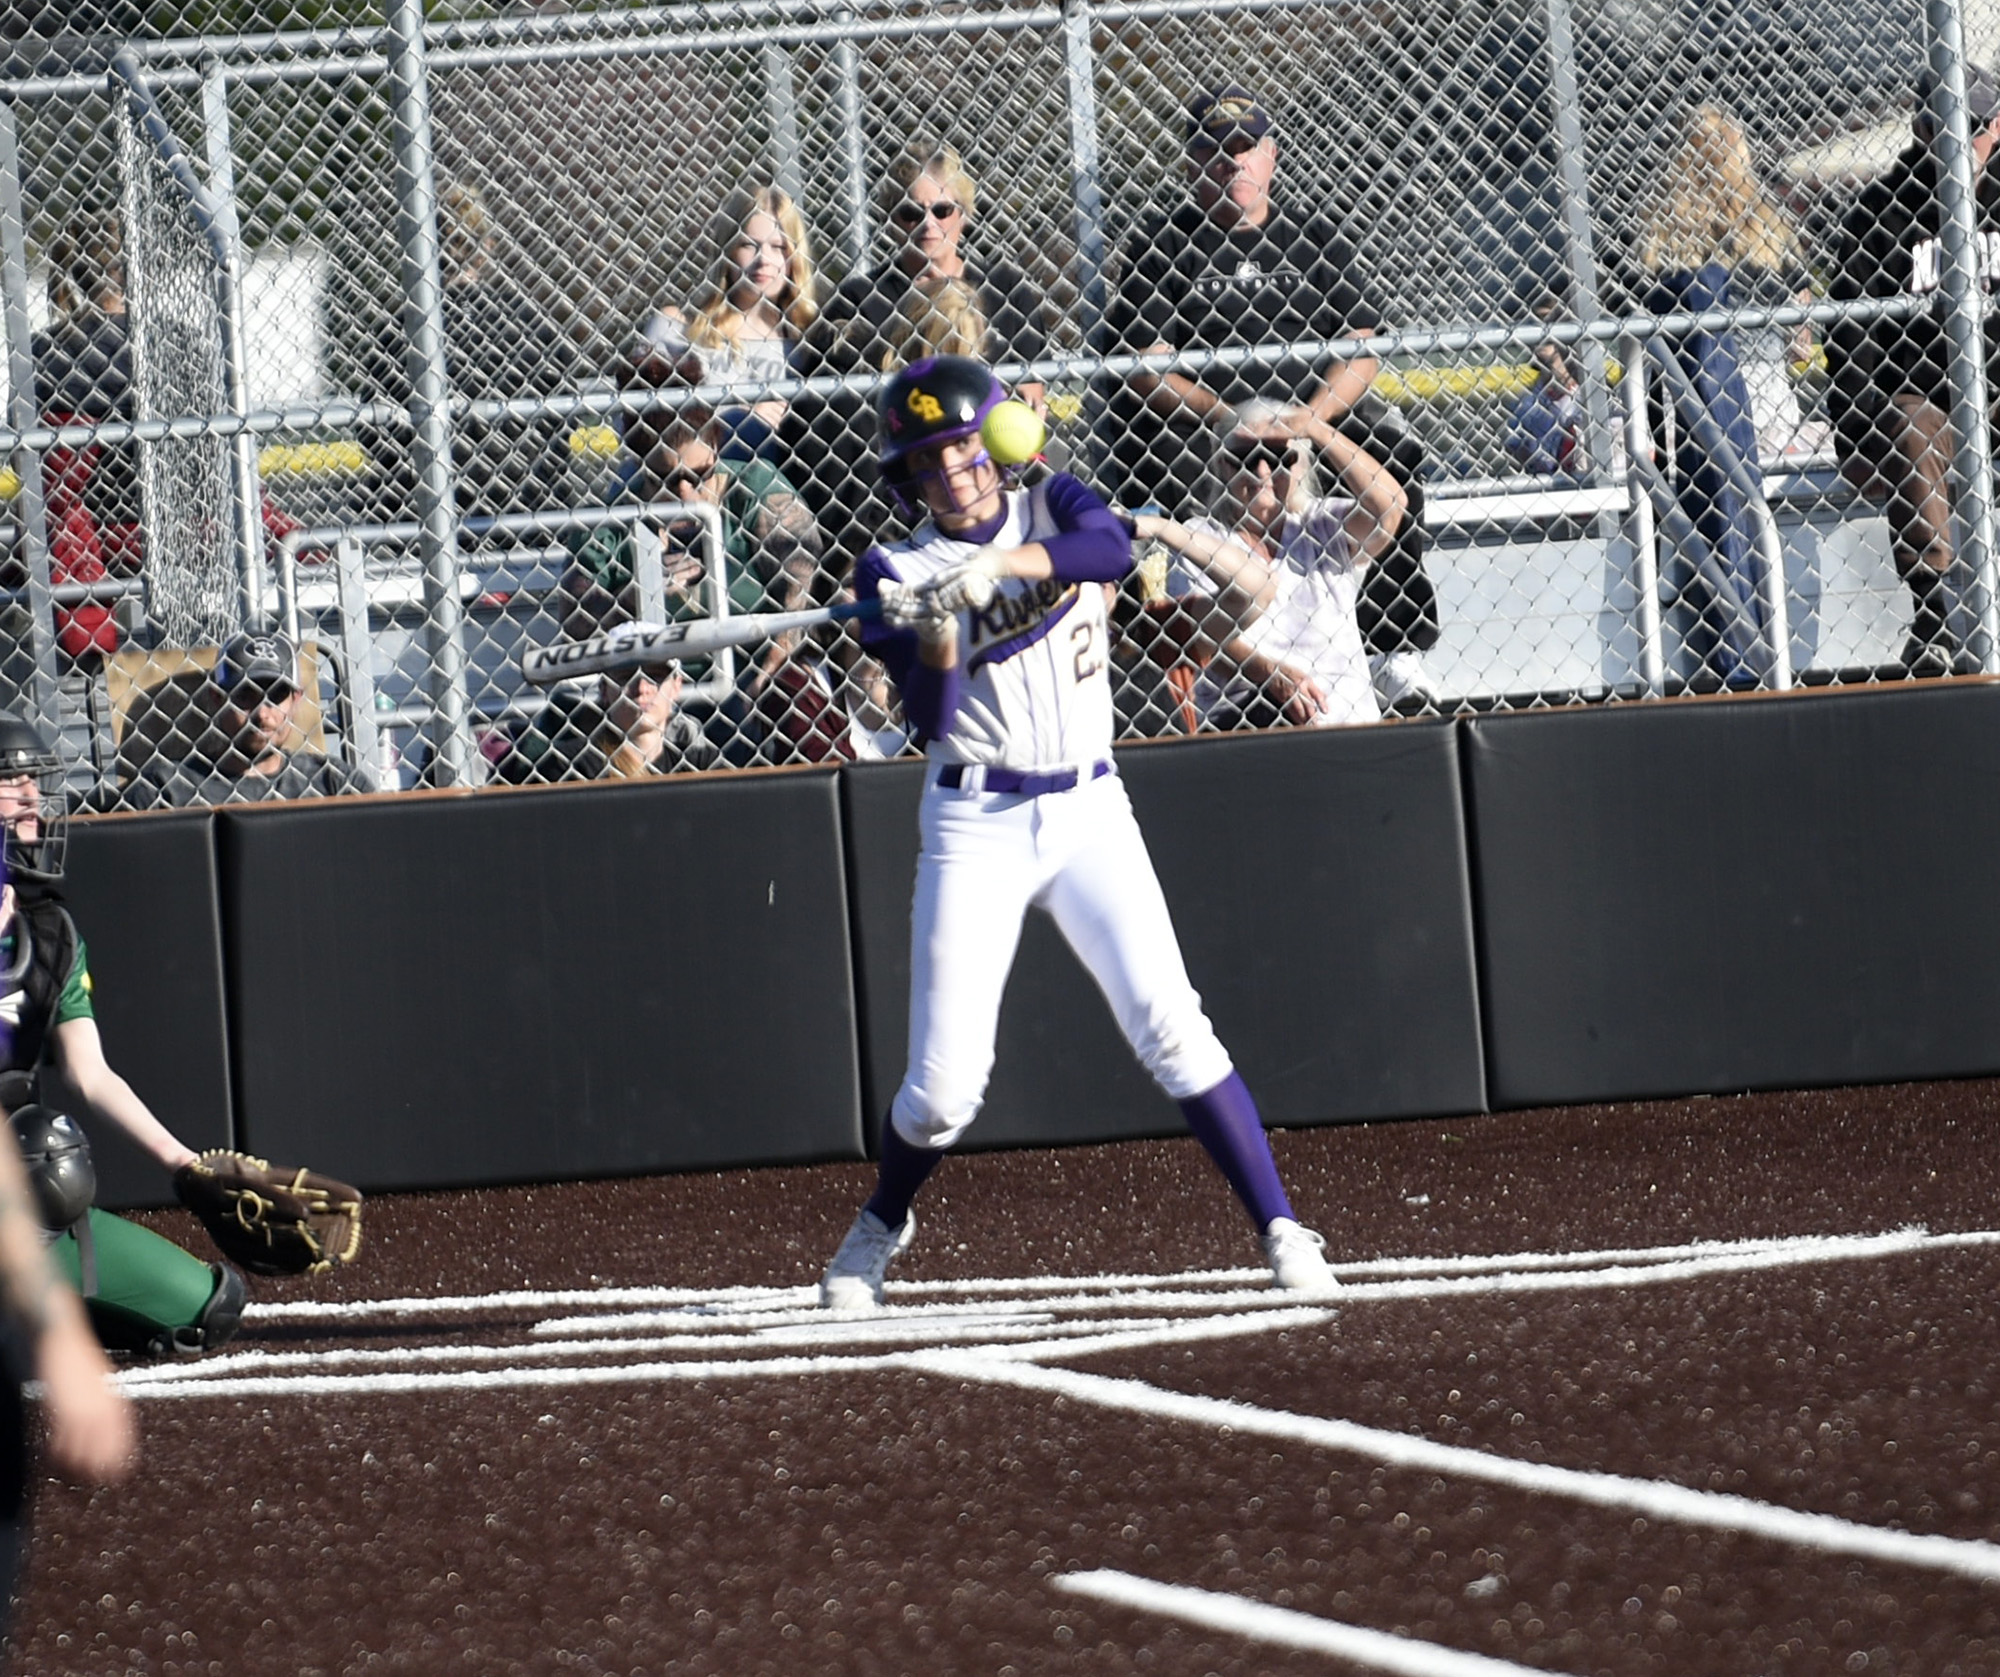 Mia Yanez of Columbia River watches the pitch come in before connecting for a hit against Evergreen in the 3A/2A slowpitch softball district tournament at Heritage High School on Friday, Oct. 20, 2023.